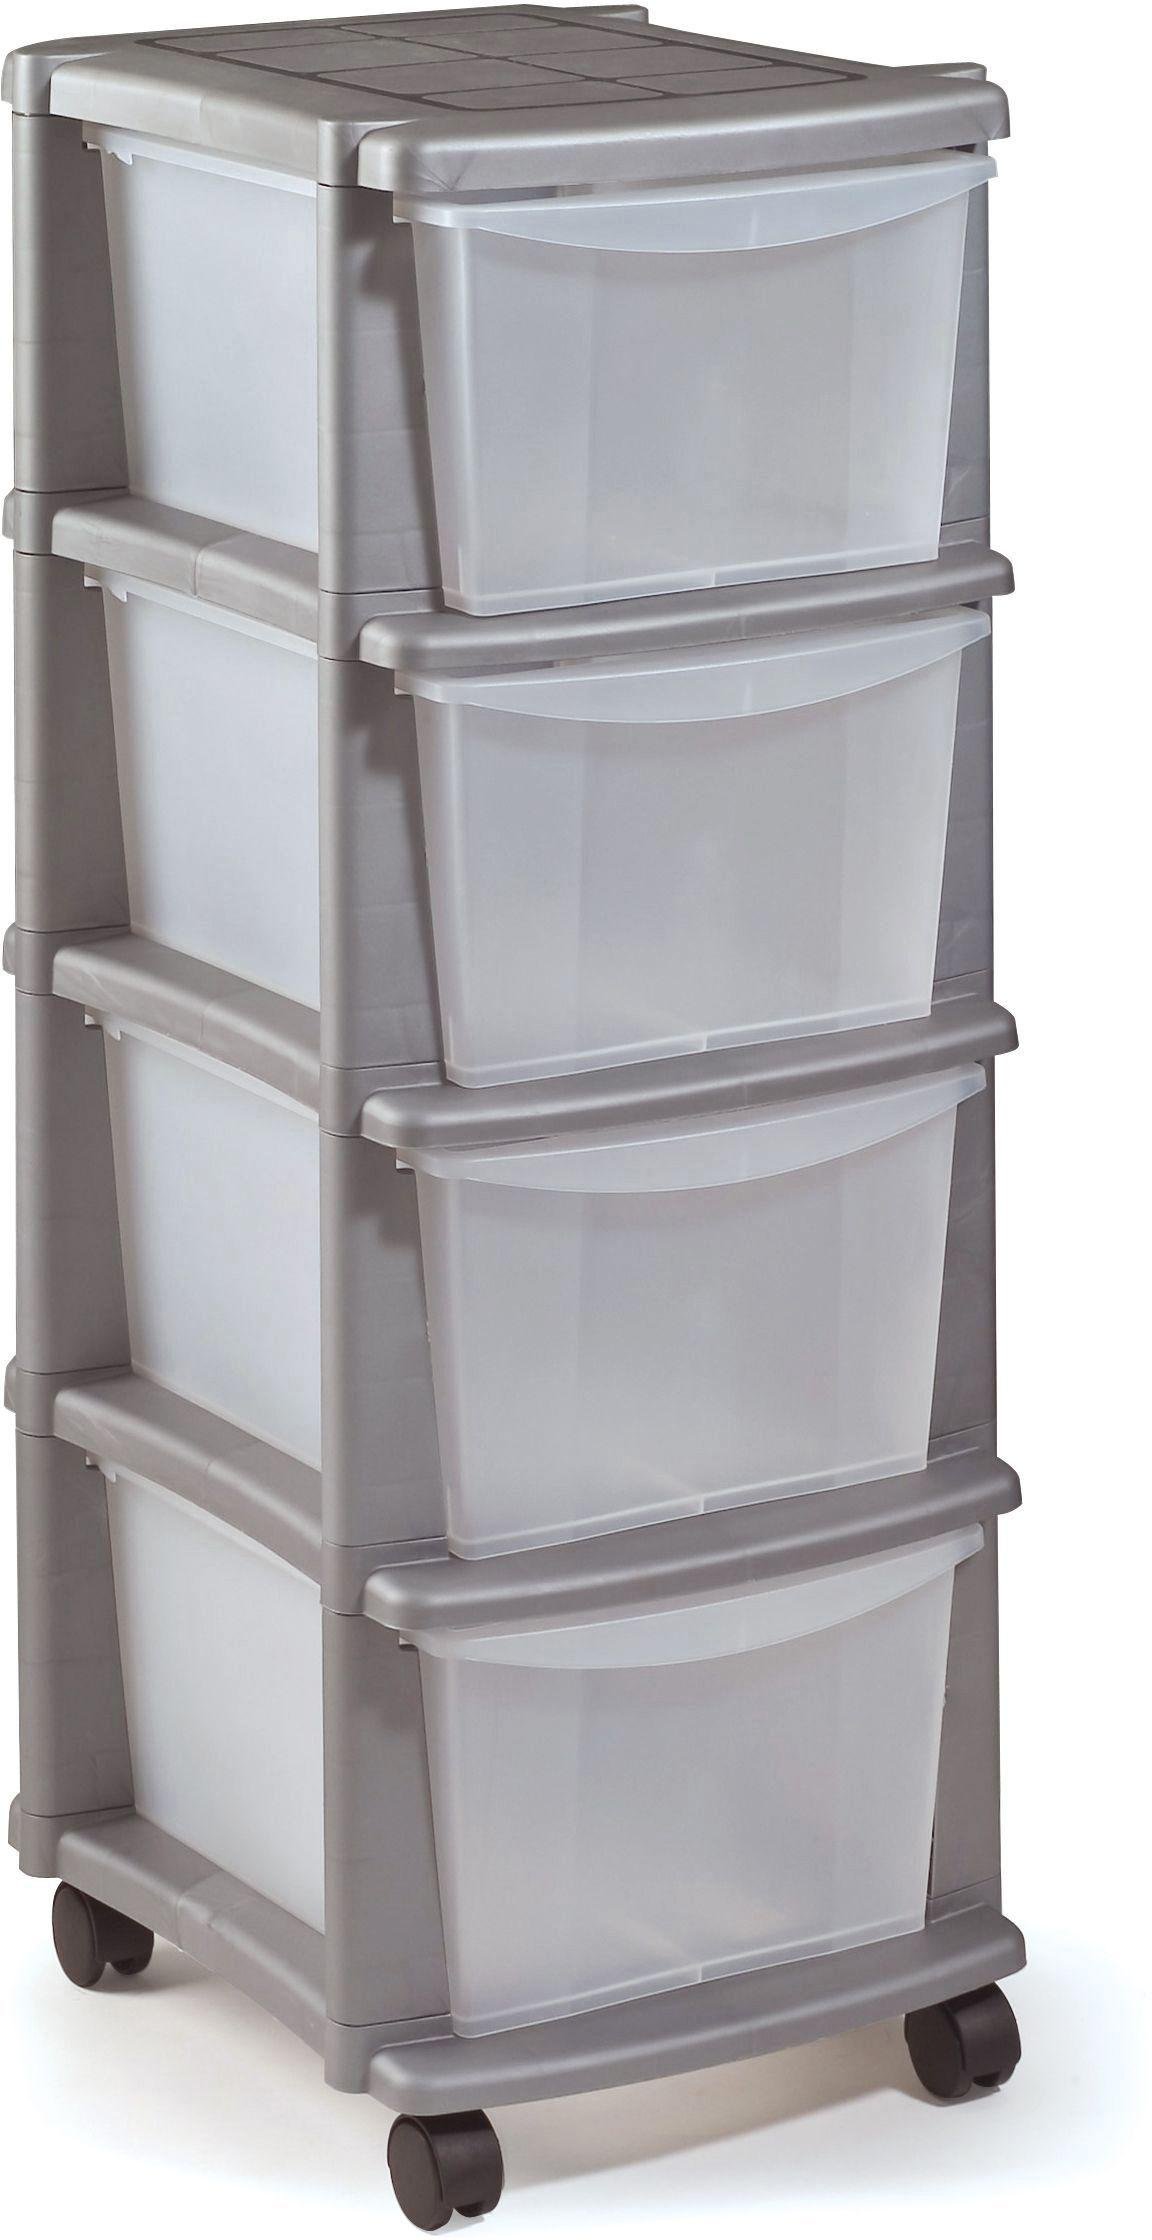 HOME 4 Drawer Silver Plastic Tower Storage Unit Review